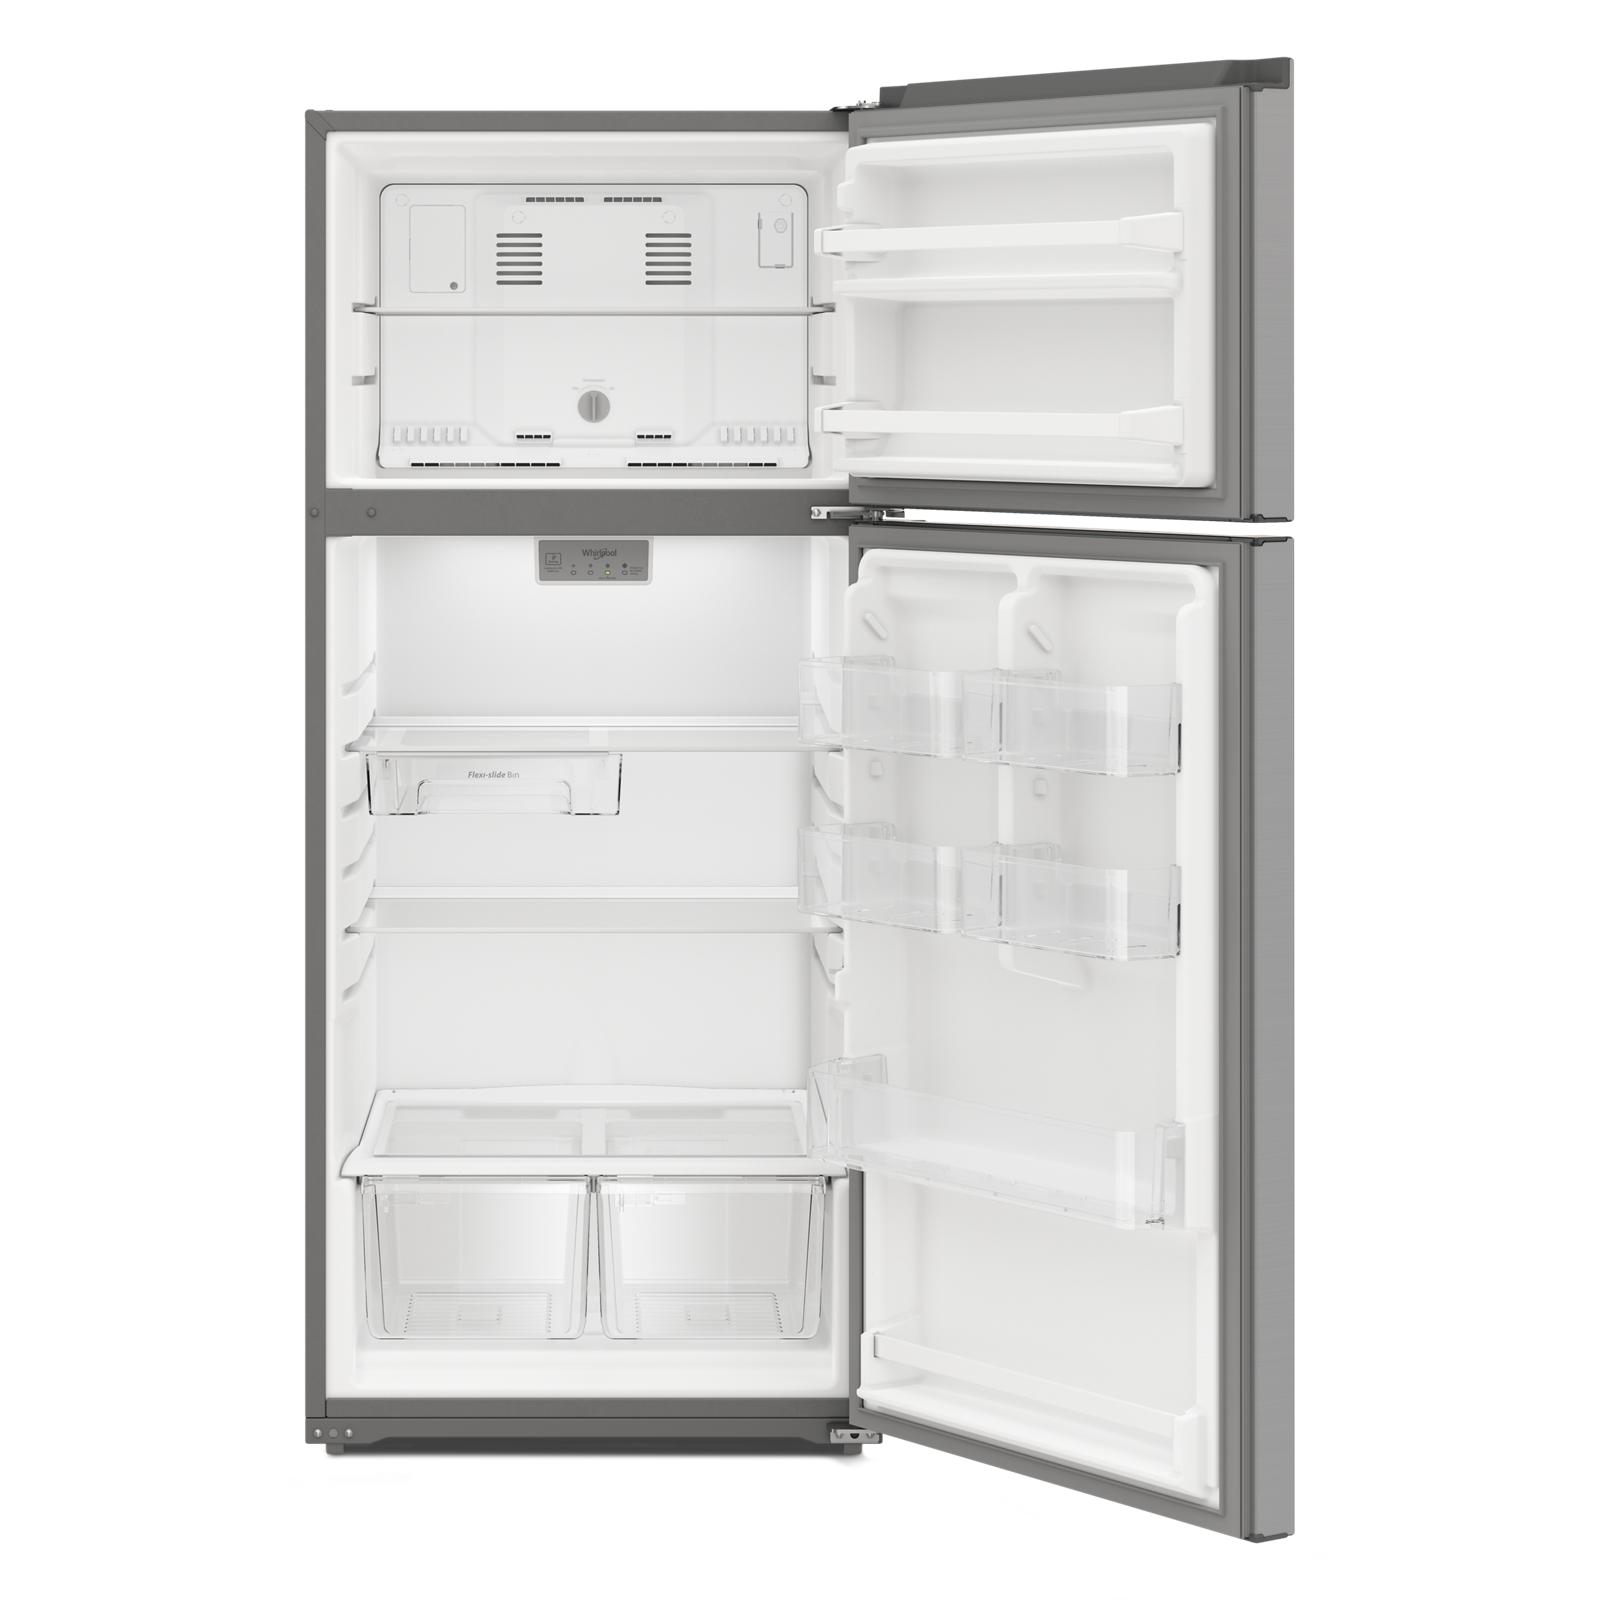 Whirlpool - 28.125 Inch 16.6 cu. ft Top Mount Refrigerator in Stainless - WRTX5028PM